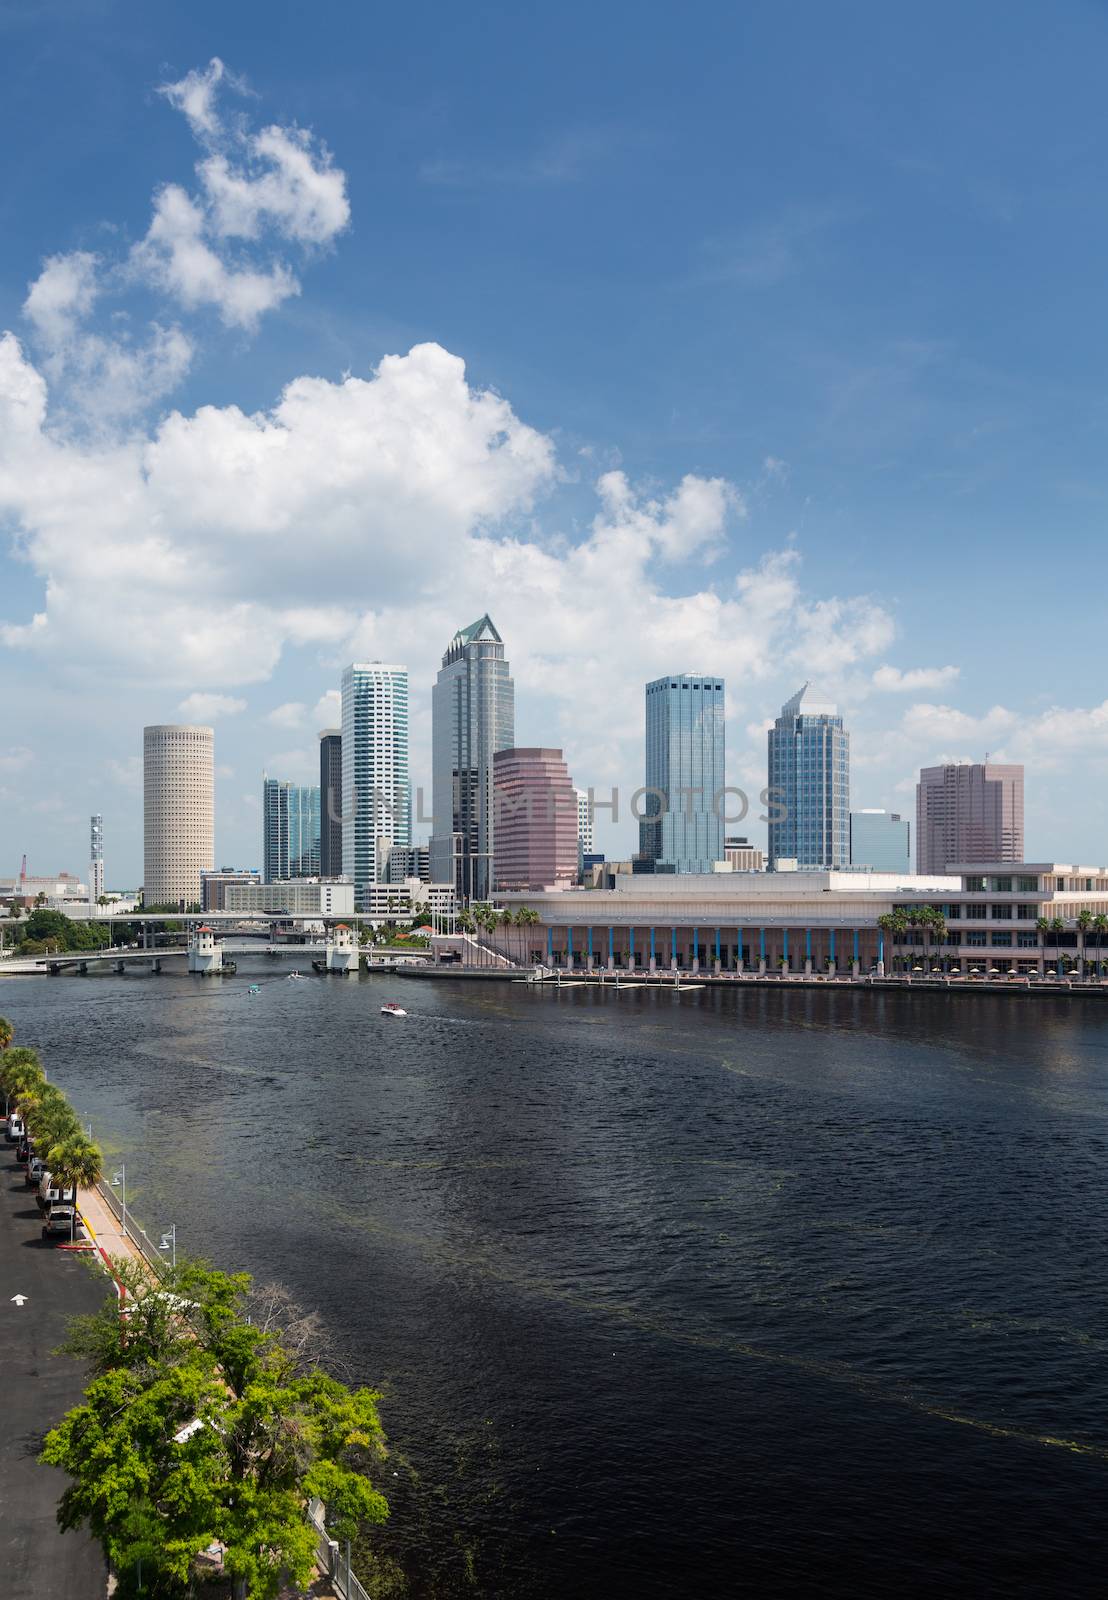 Florida skyline at Tampa with the Convention Center on the riverbank. Taken in summer during the day